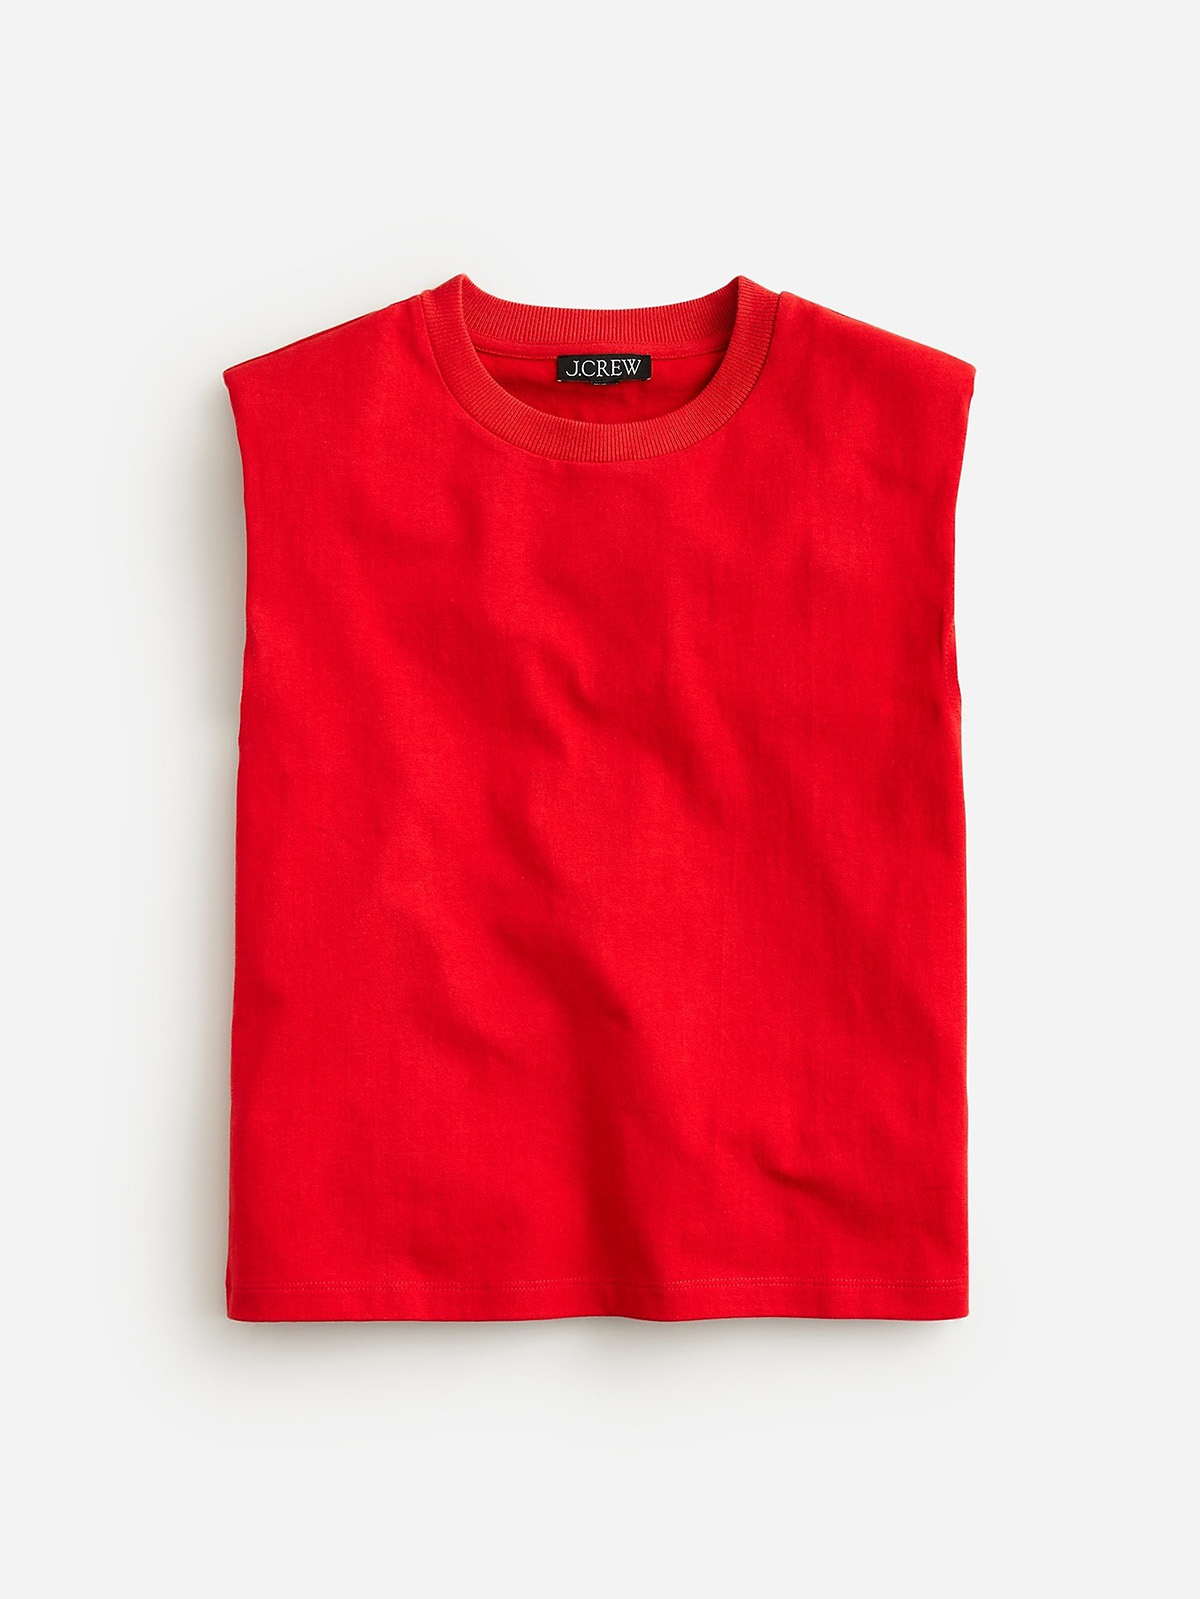 Structured Muscle T-Shirt in Mariner Cotton